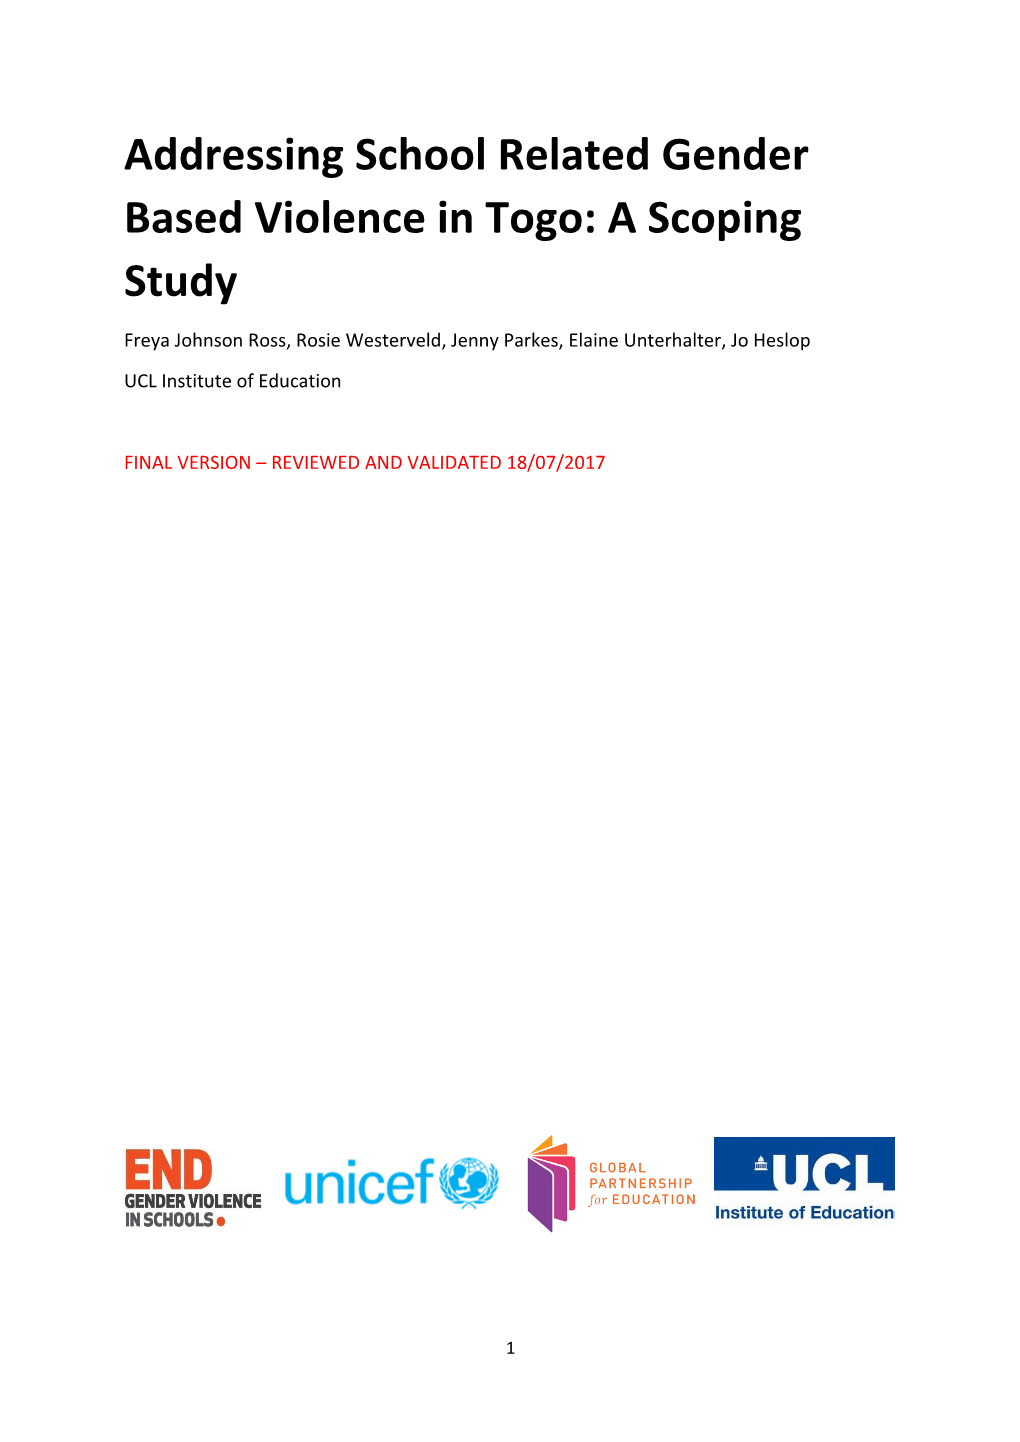 Addressing School Related Gender Based Violence in Togo: a Scoping Study